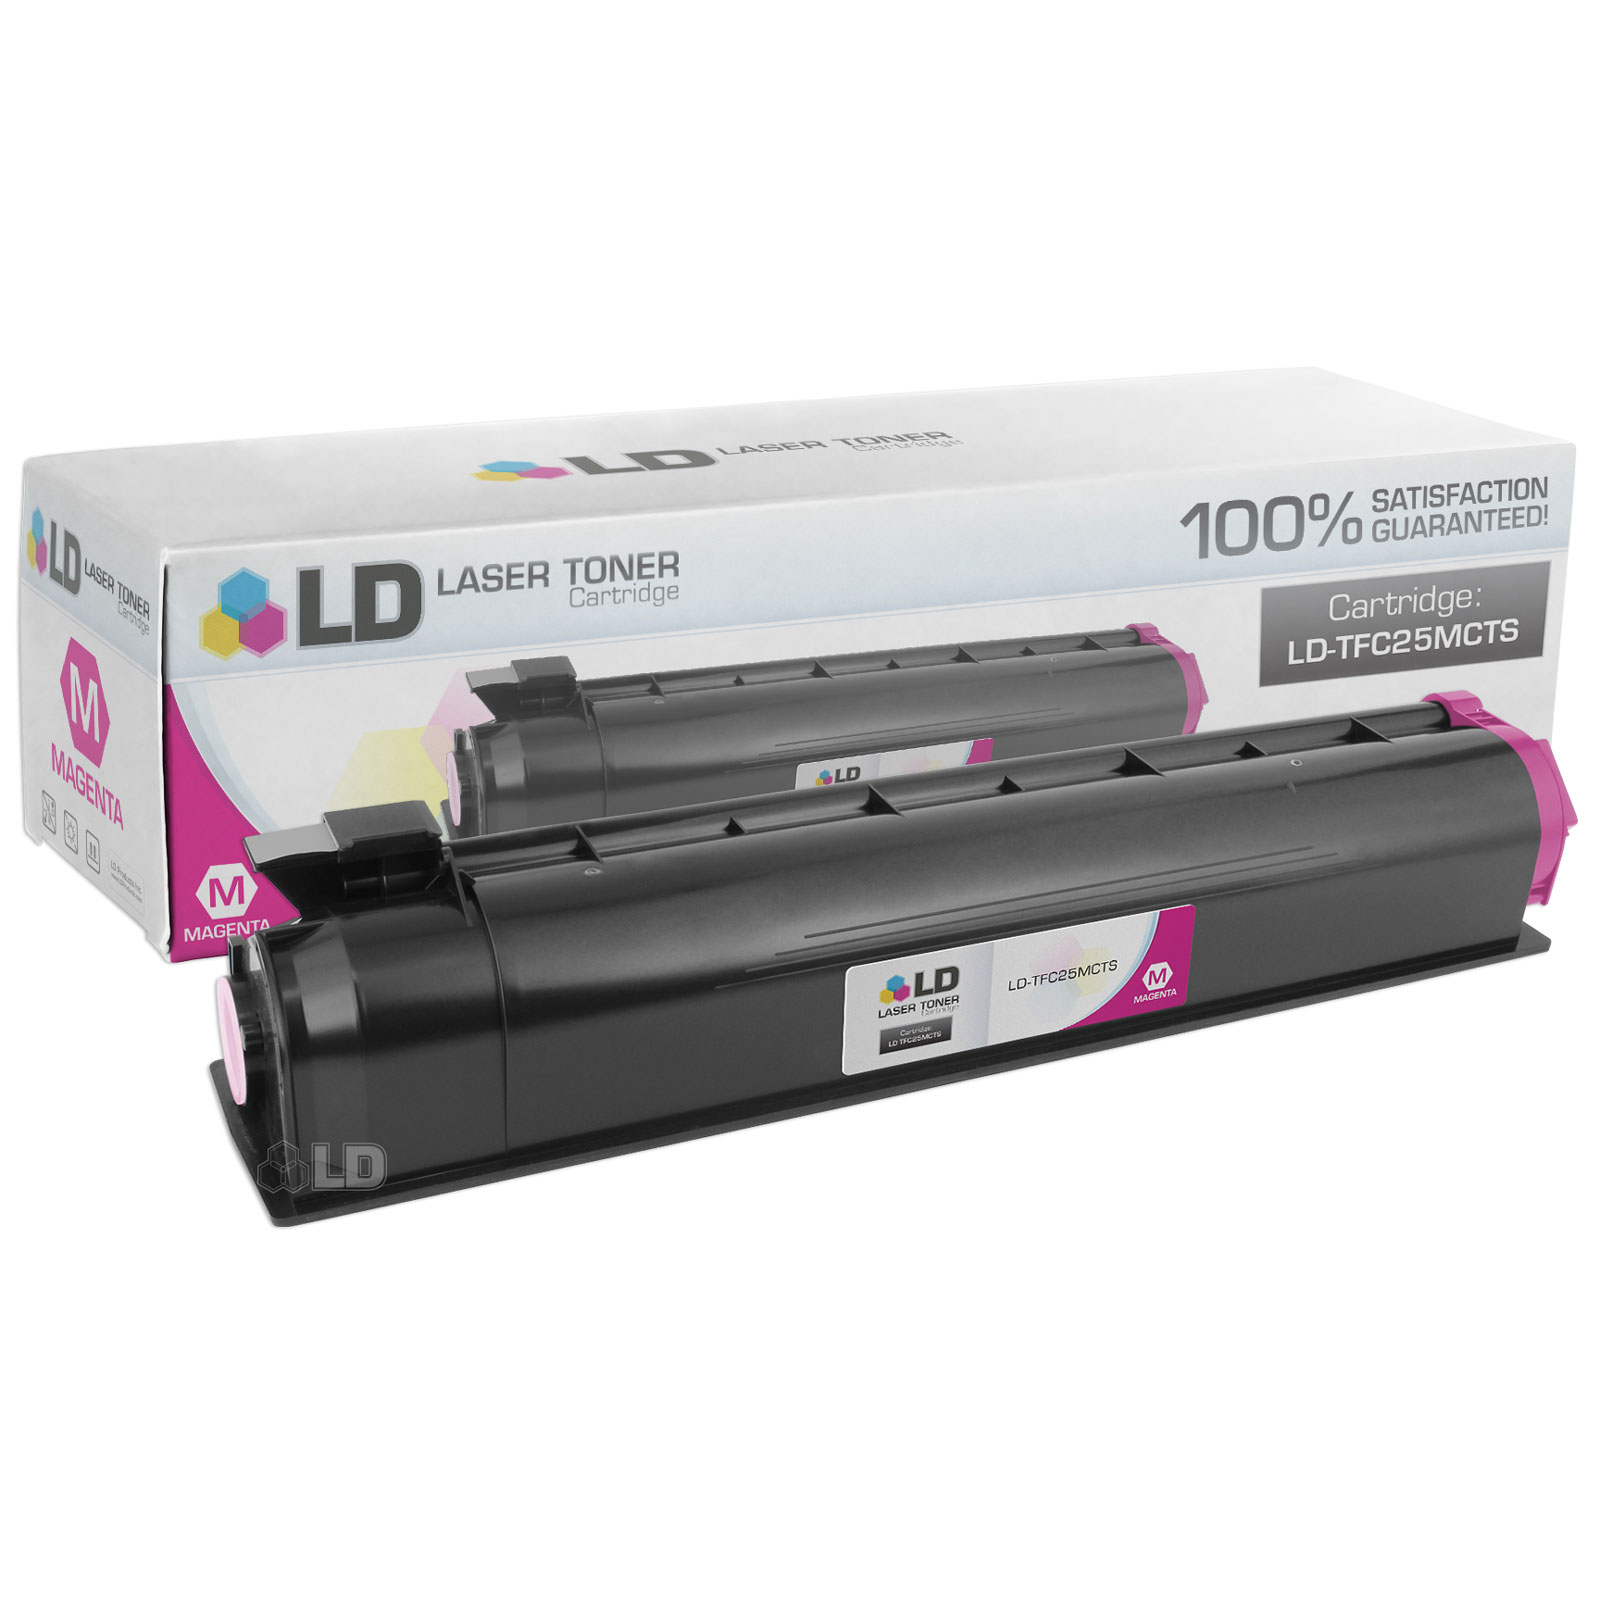 LD Compatible Replacement for Toshiba T-FC25-M Magenta Laser Toner Cartridge for use in Toshiba e-Studio 2040C, 2540C, 3040C, 3540C, and 4540C s - image 1 of 1